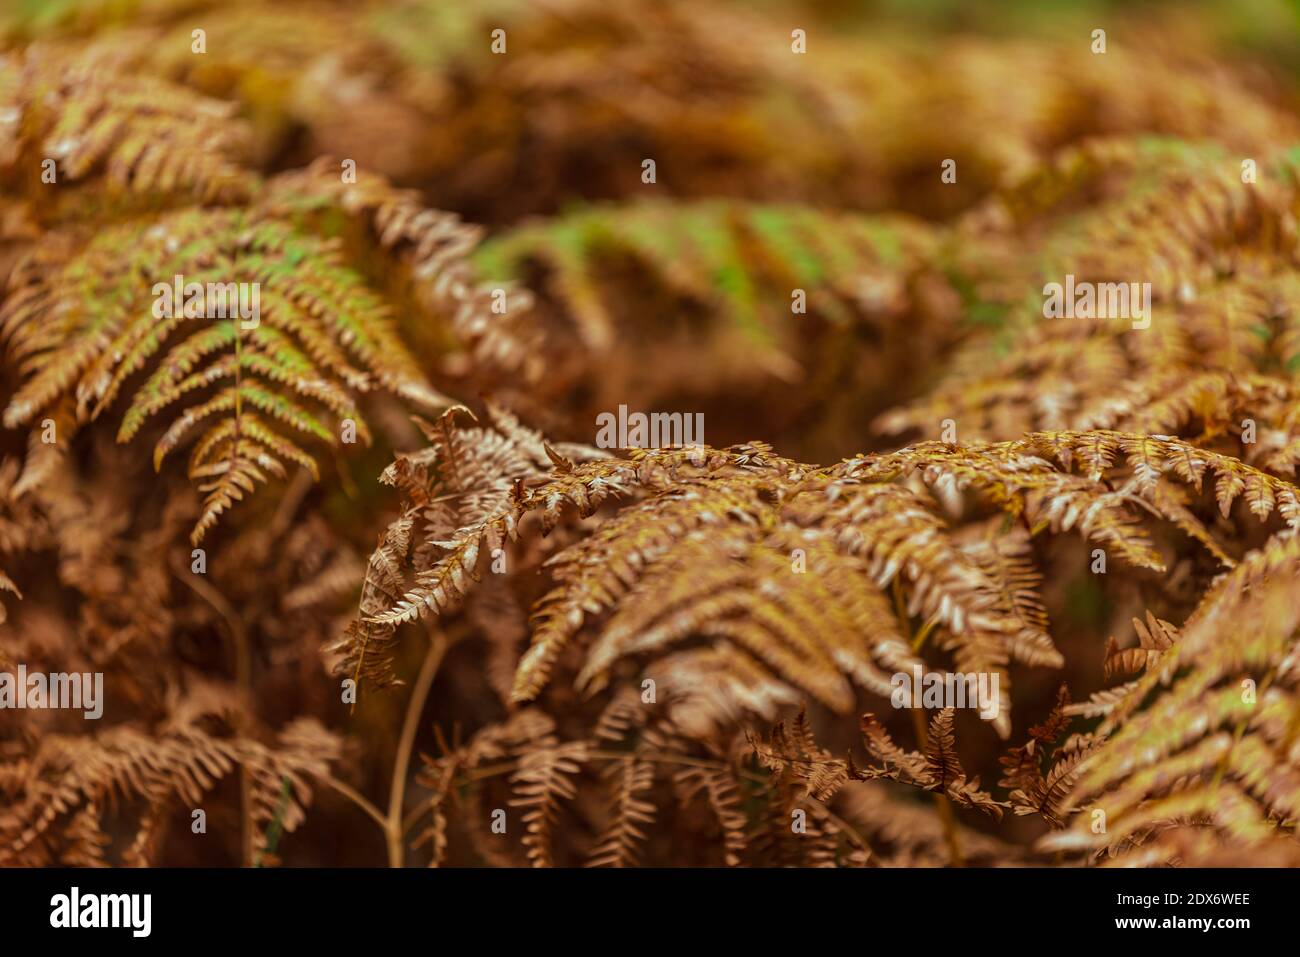 fern leaves brown and green next to each other under the branches of forest trees Stock Photo